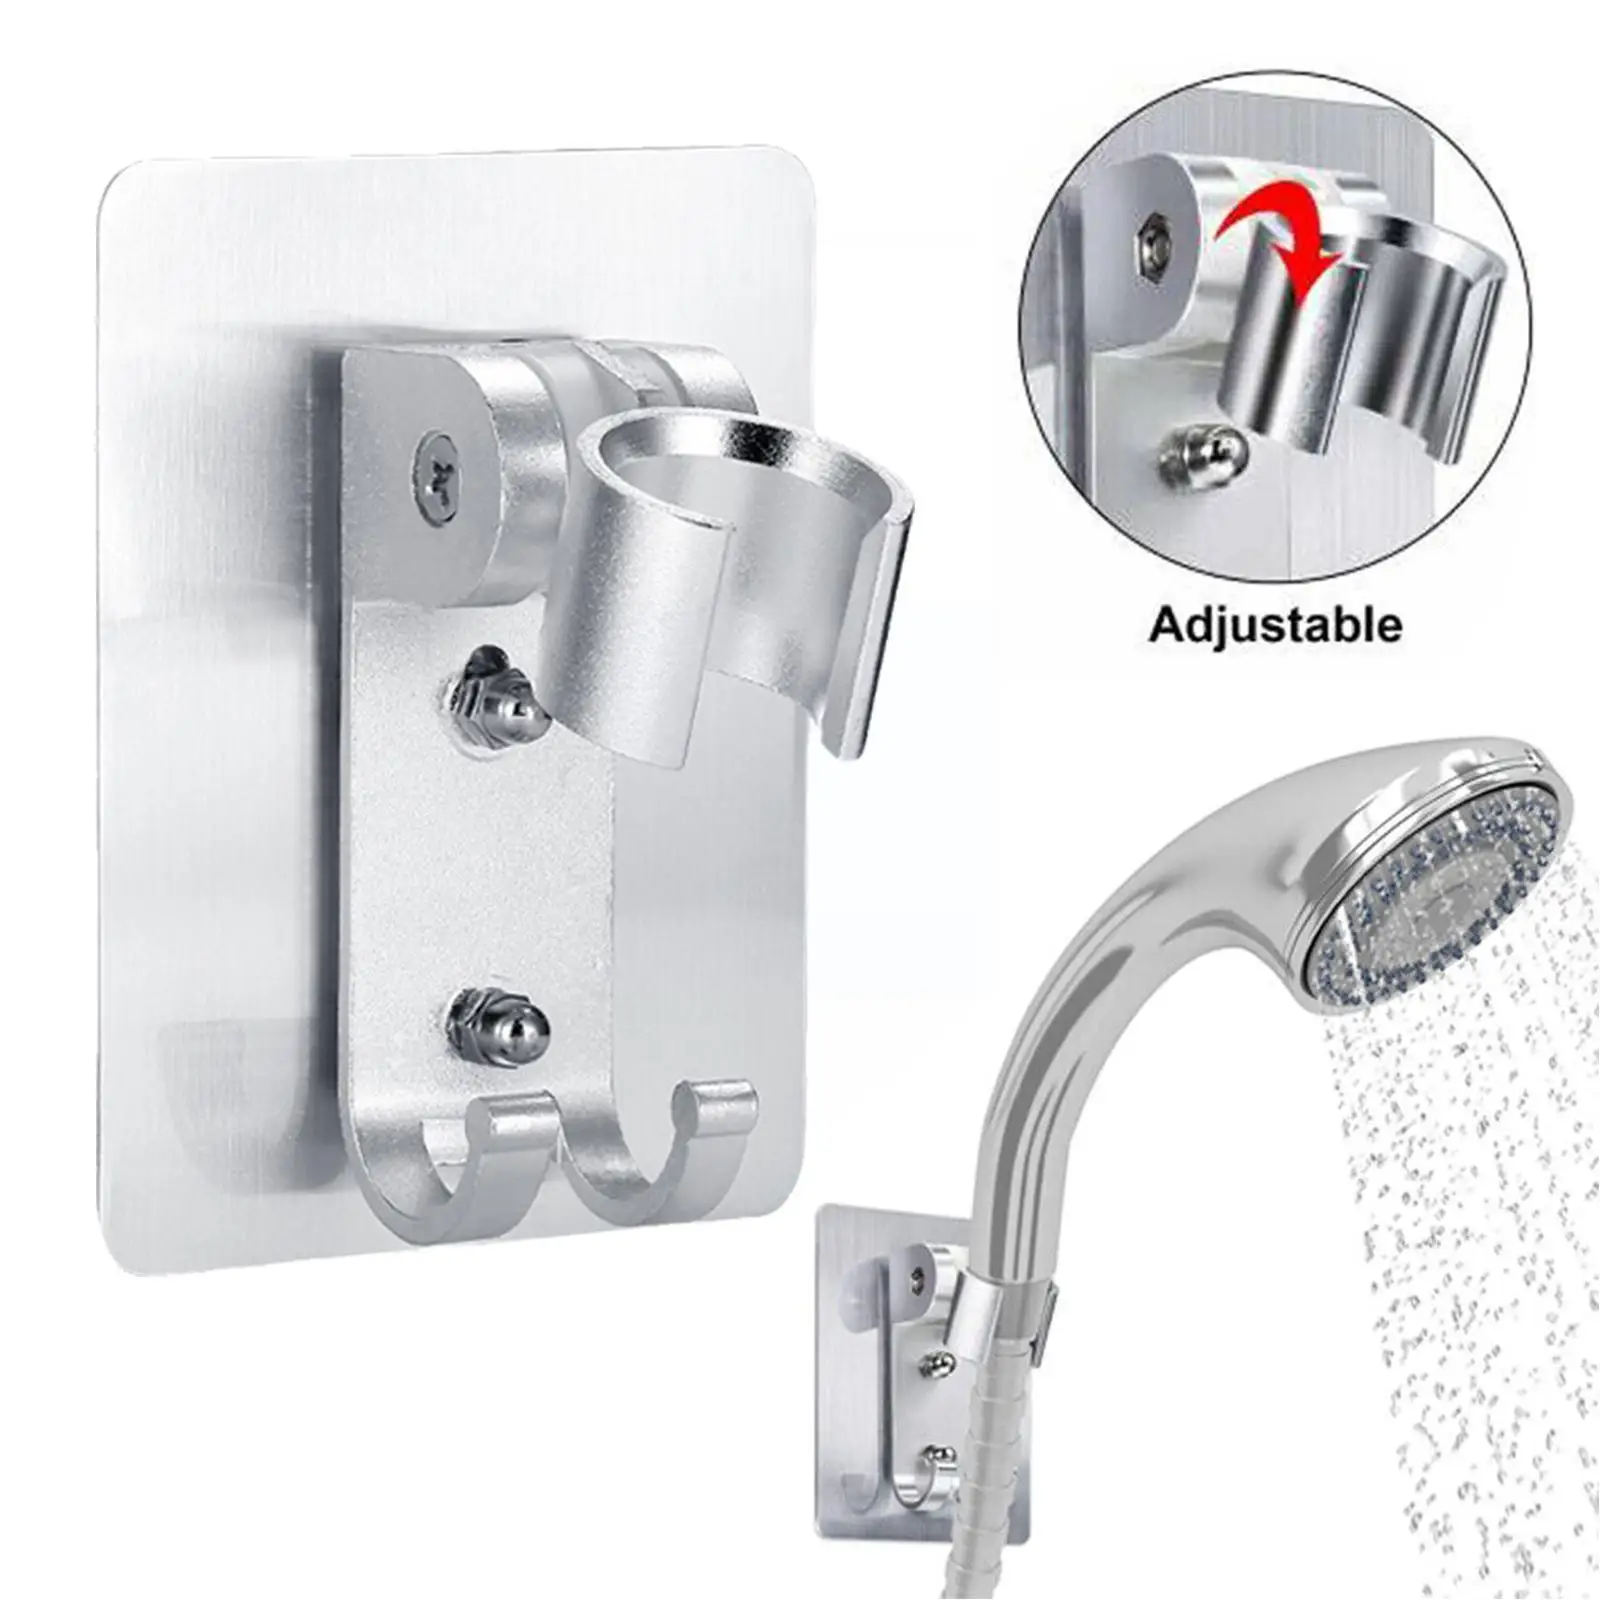 

90° Strong Adhesive Aluminum Wall Gel Mounted Shower Bathroom Portable Holder Stand Bracket Accessories Head Adjustable M6F2